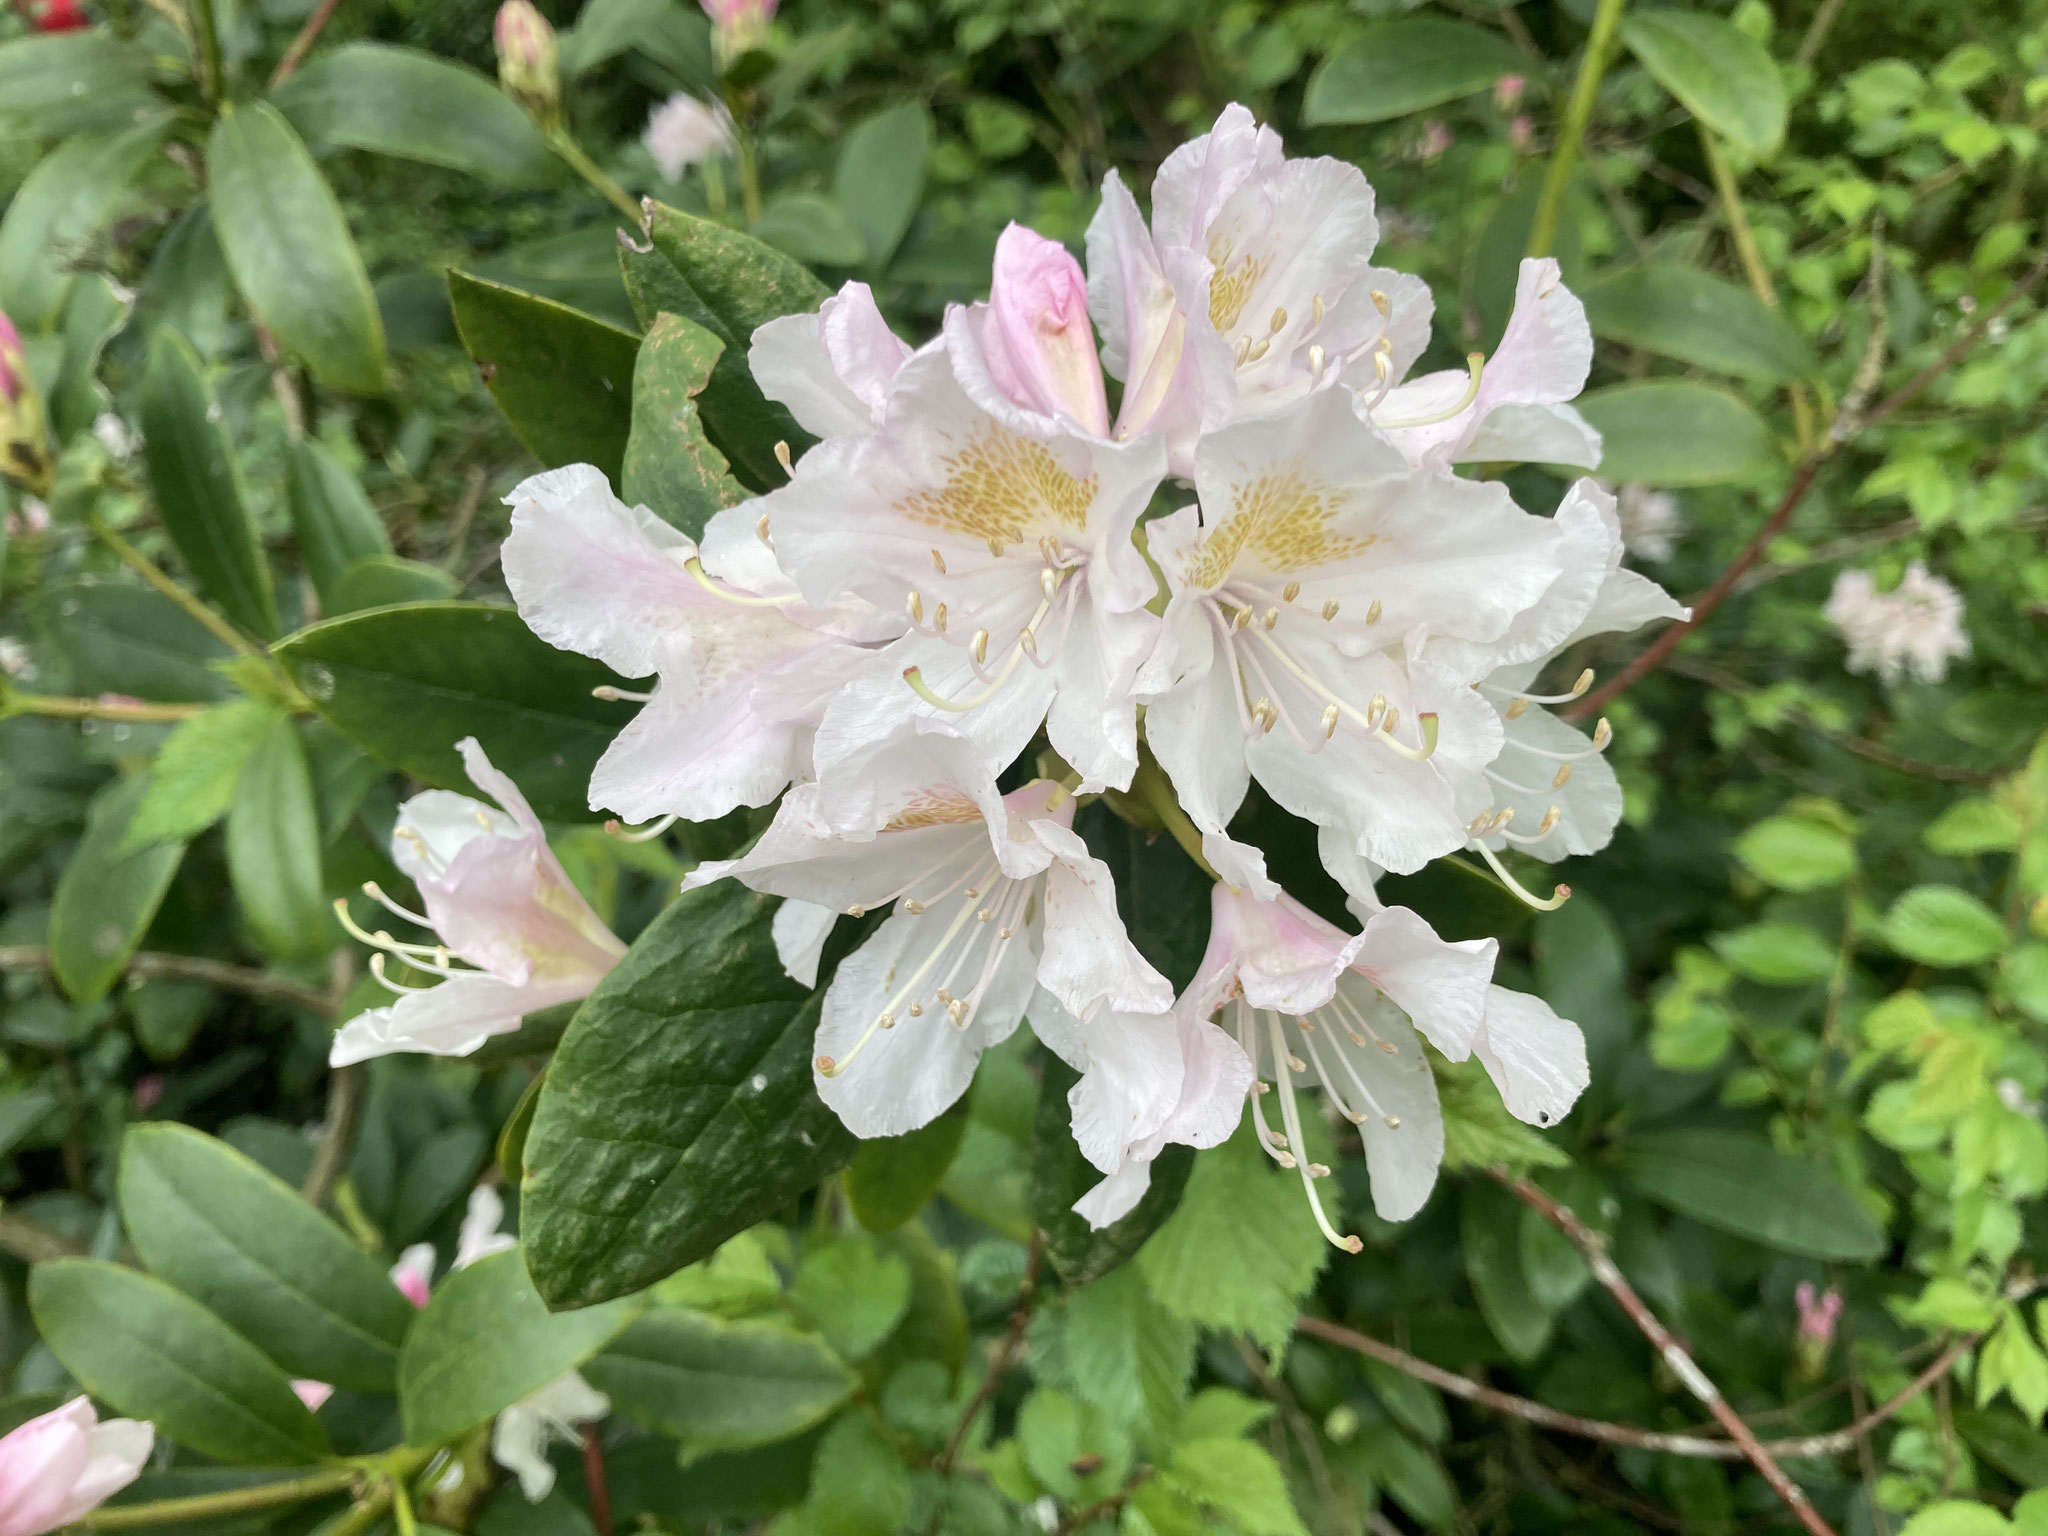 Rhododendron ‘Cunningham’s white’